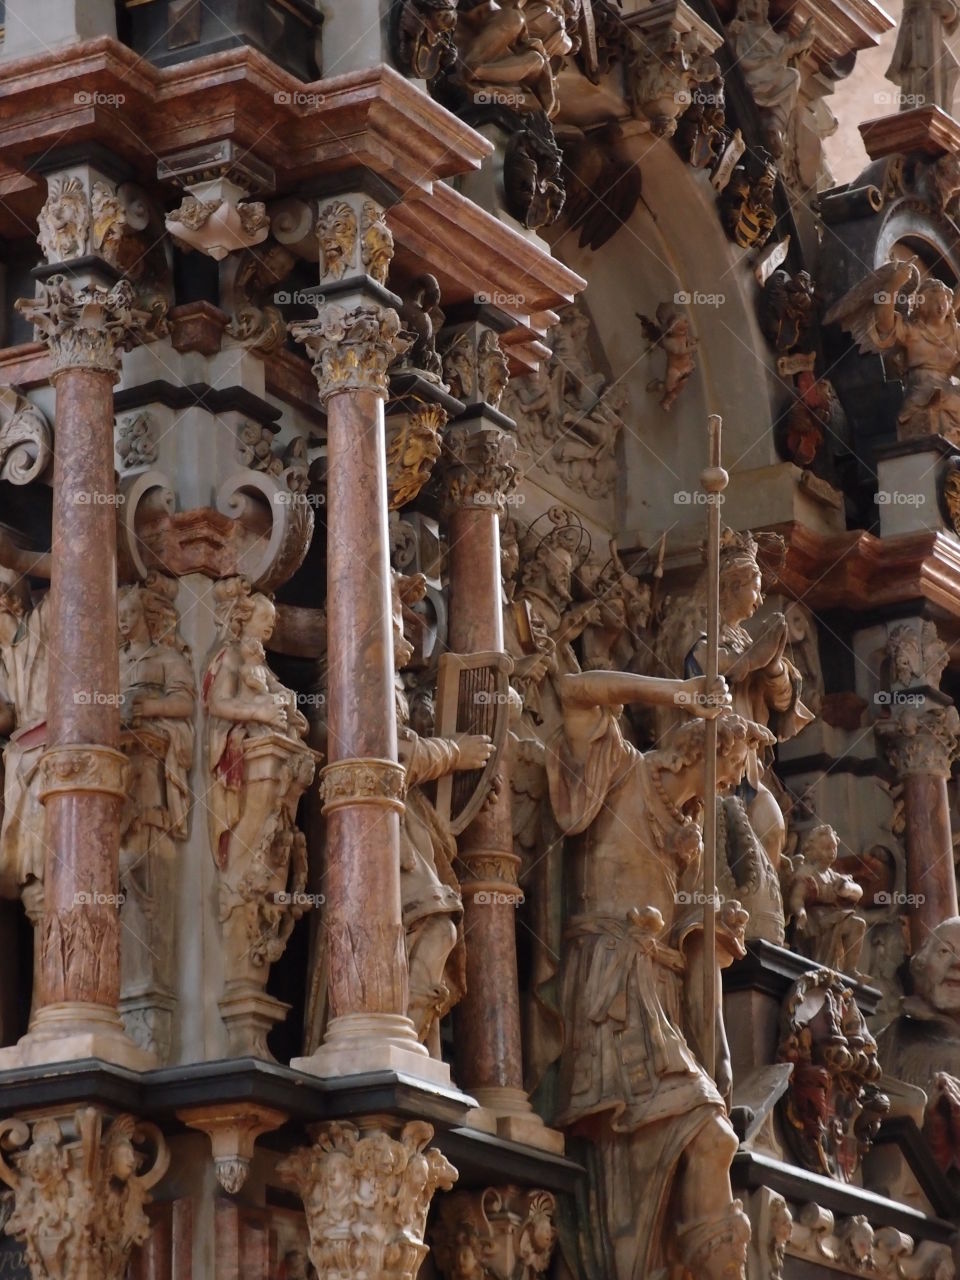 A religious carving in marble depicts figures and pillars in fine detail. 